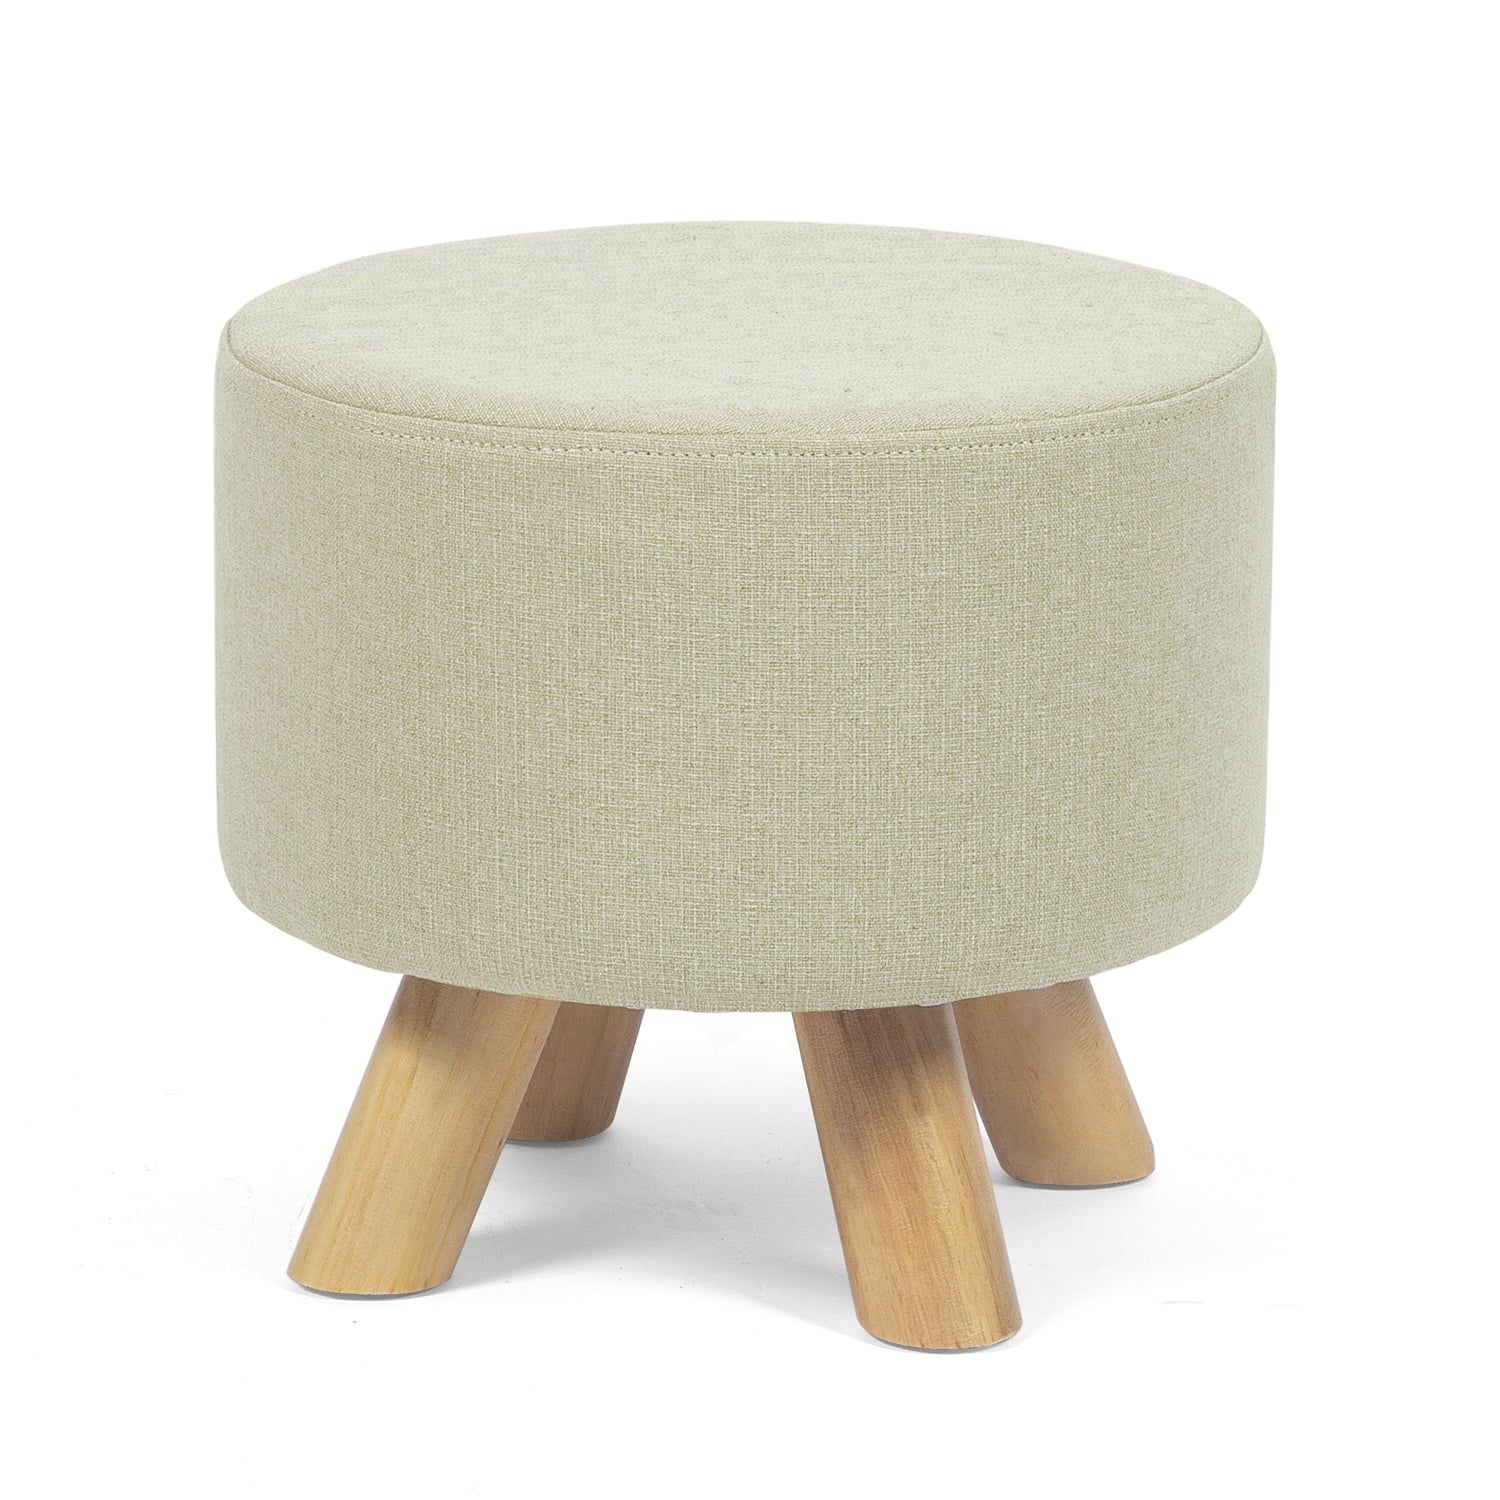 Joveco Round Ottoman Foot Rest Stool, Small Fabric Footstool with Non-Skid Wood Legs, Beige | Walmart (US)